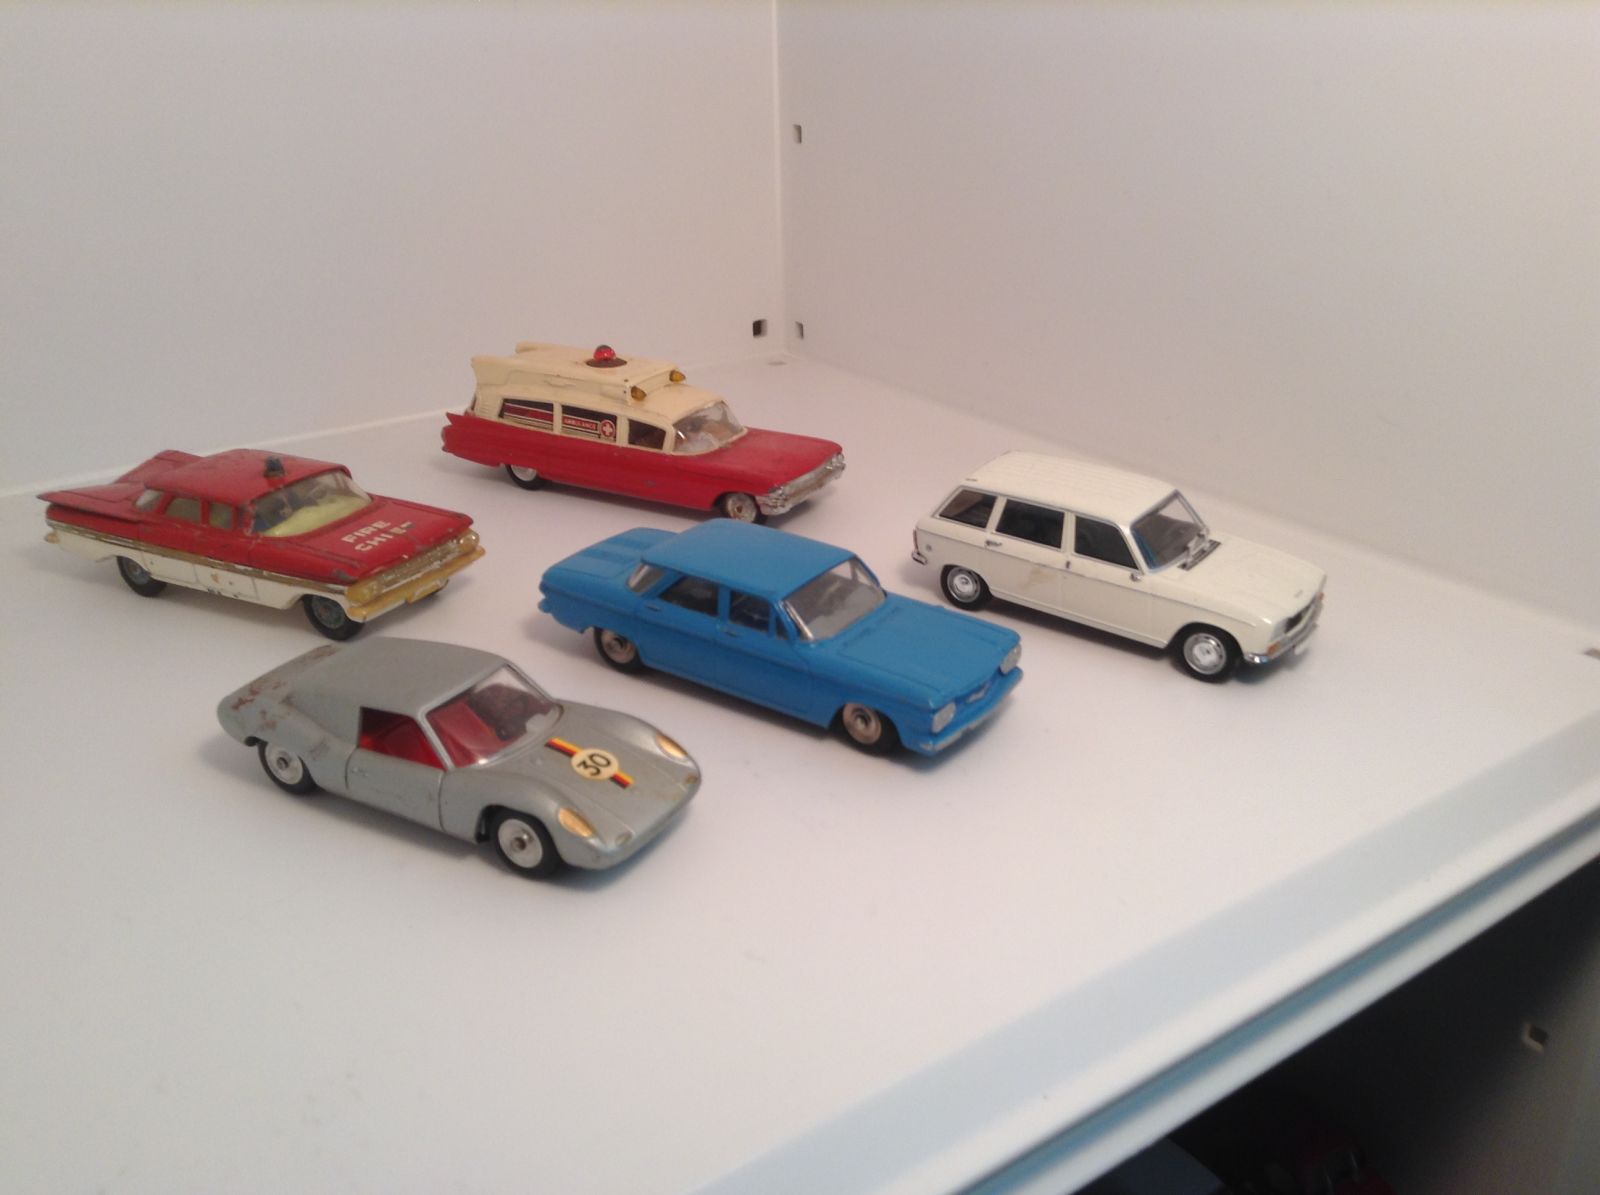 Solido Porsche GT, Dinky Corvair (repainted), Corgi Chevy Impala, Corgi battery op Cadillac Ambulance (corroded), Minichamps Peugeot 304 Break (various damage, mainly to the trim)